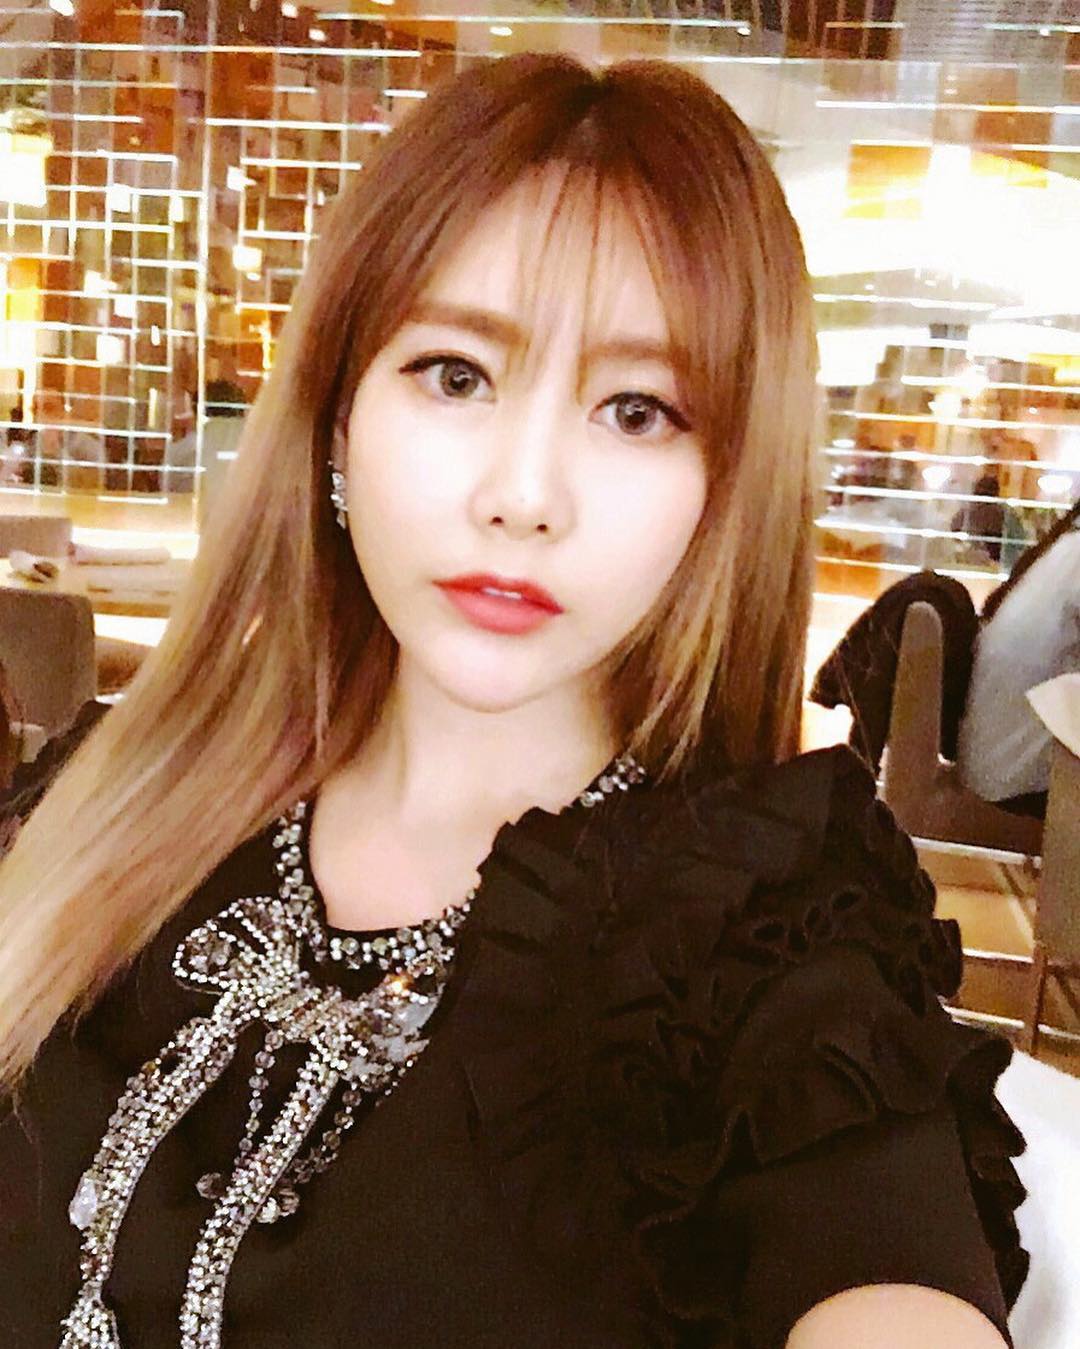 parallel Shaded drivende Check out the pretty selfies from T-ara's Qri | T-ara World